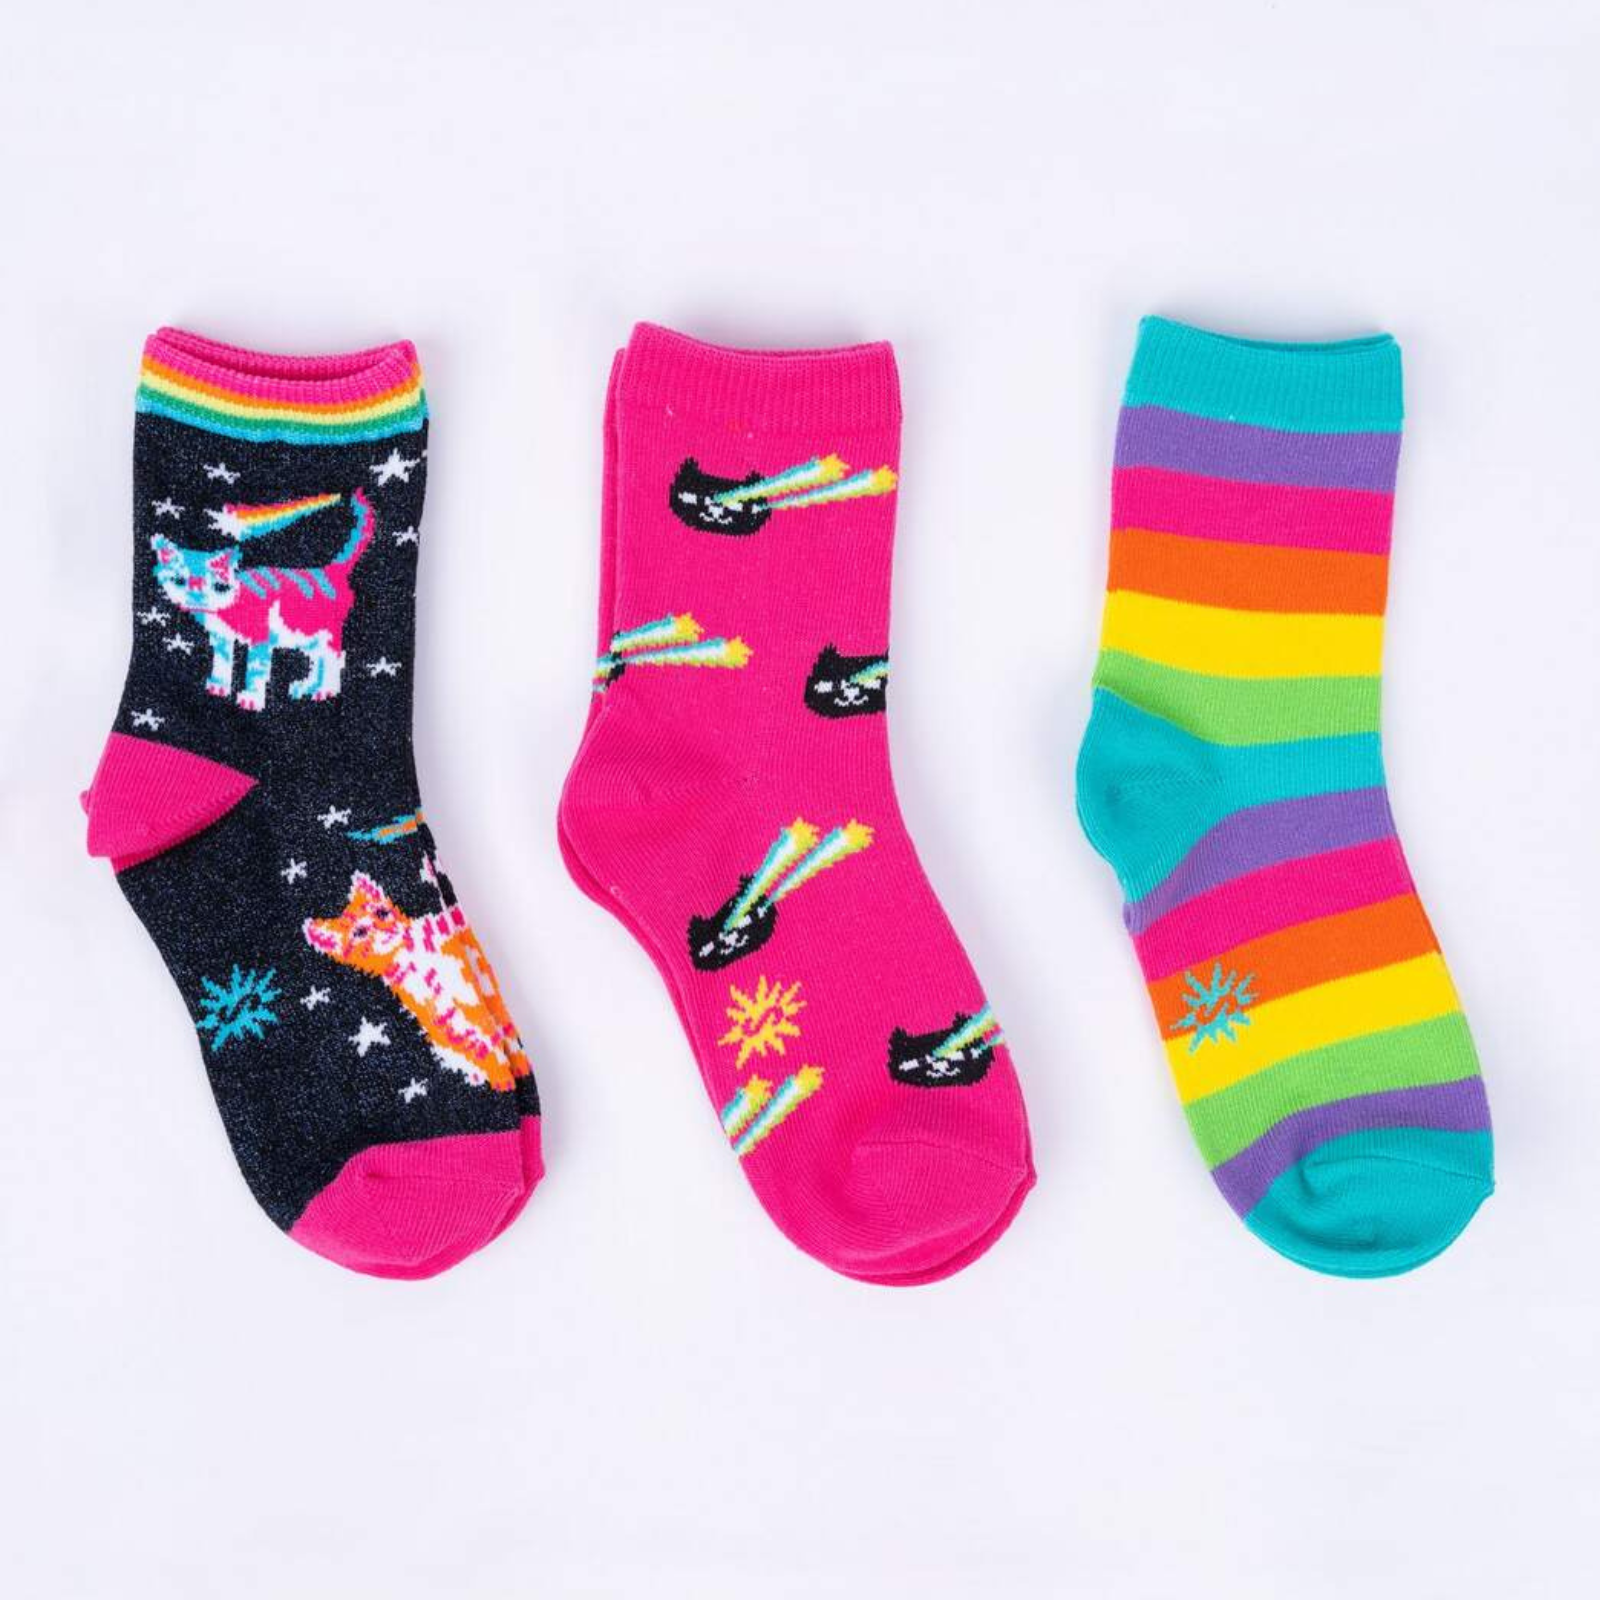 Sock It To Me Space Cats 3-pack kids' socks on display